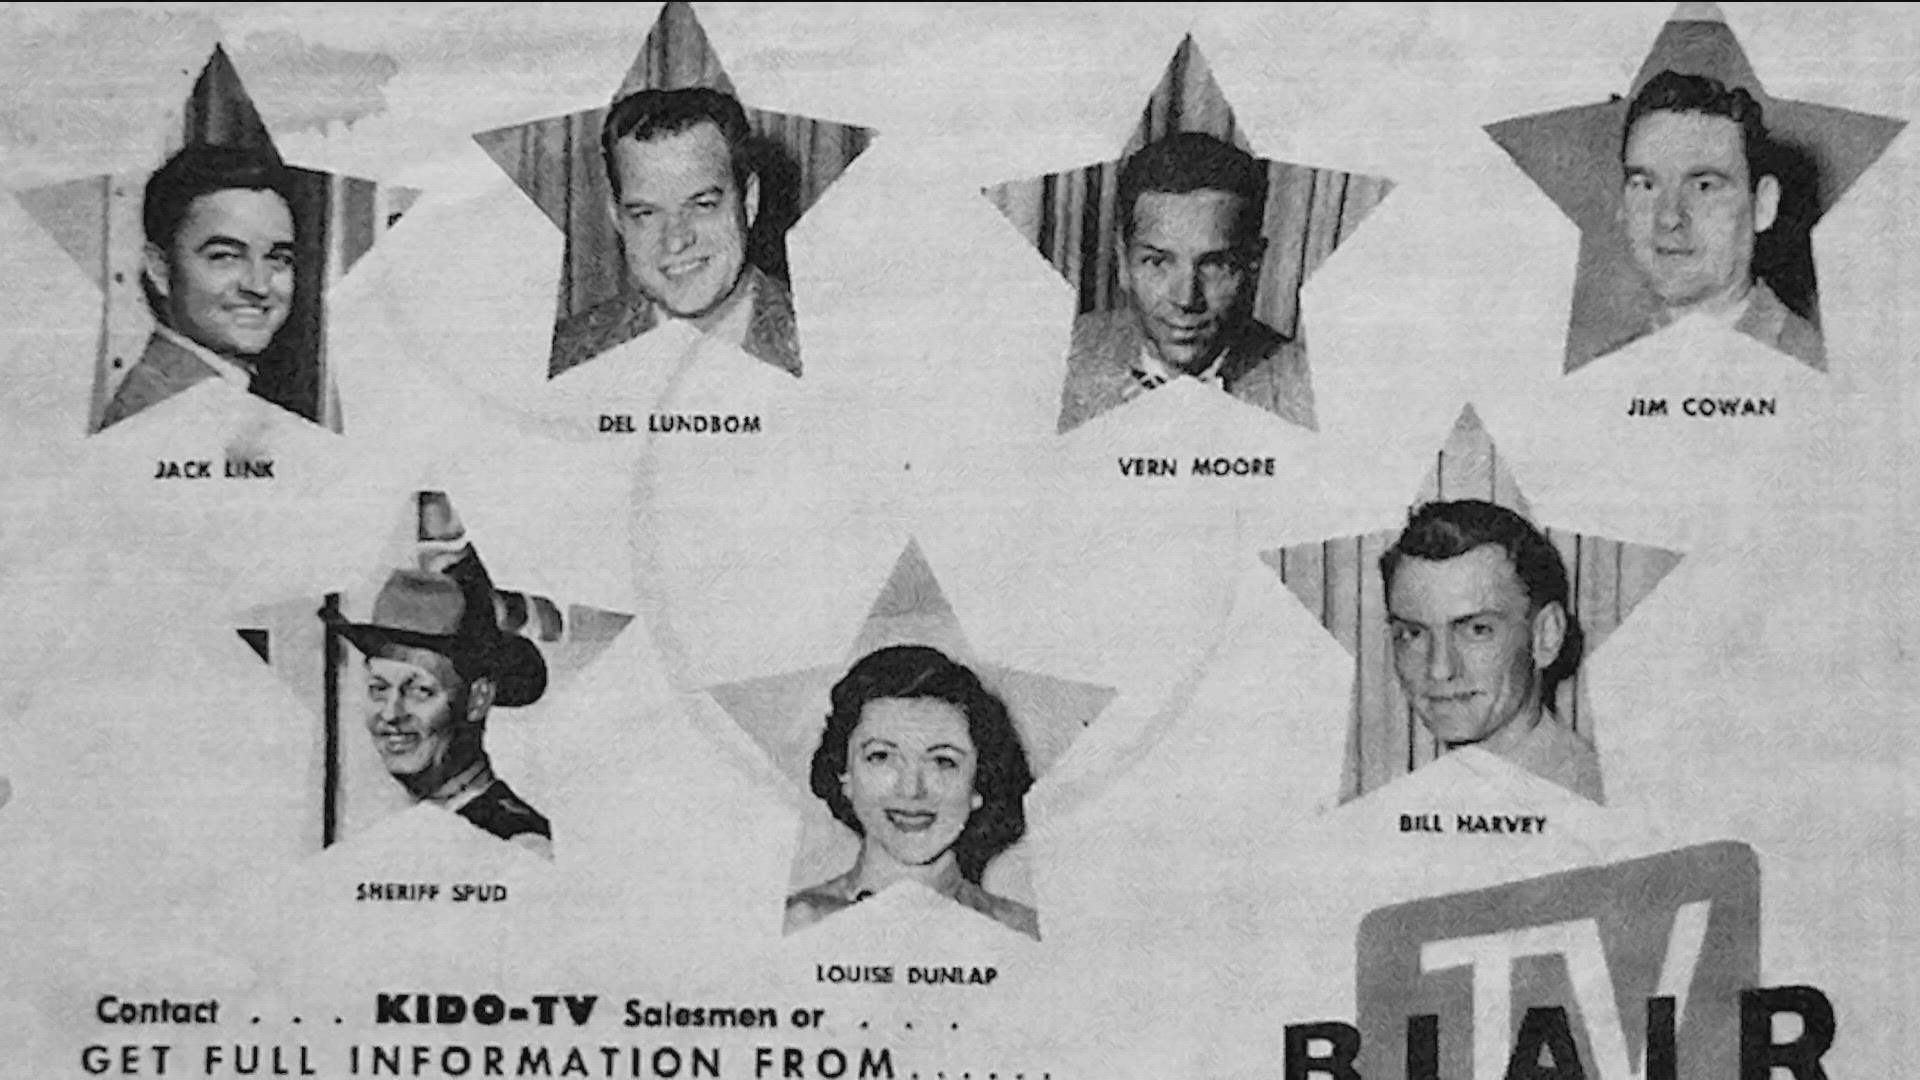 The station that first signed on July 12, 1953, is now known as KTVB, but it didn't start that way. Doug Petcash brings us the story of how it began.